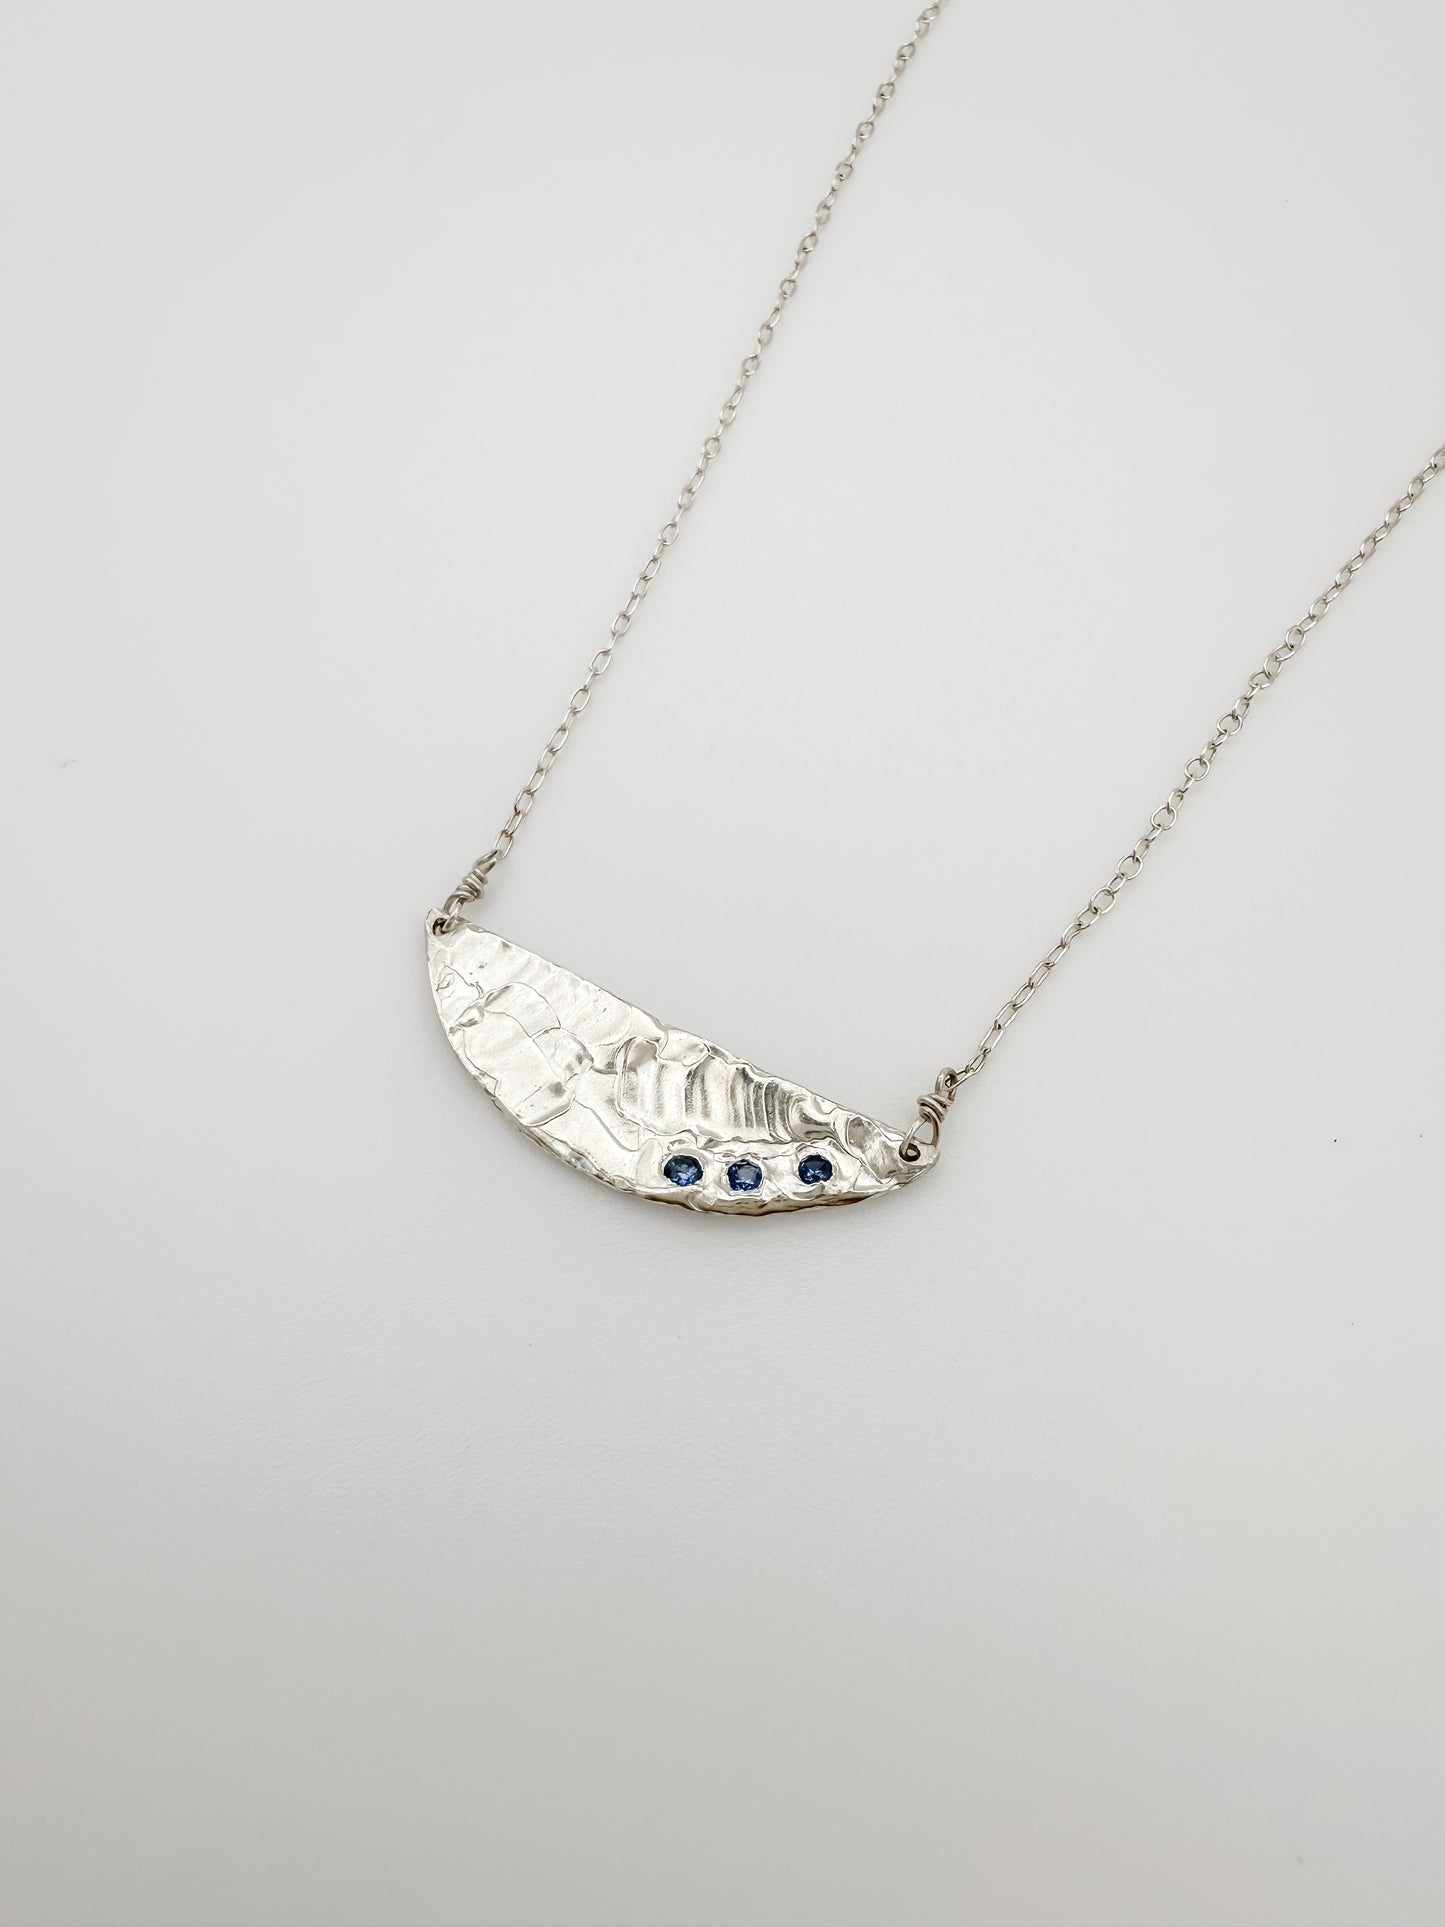 DEMI LUNE | 3 blue sapphires nestled in half moon necklace with recycled sterling silver